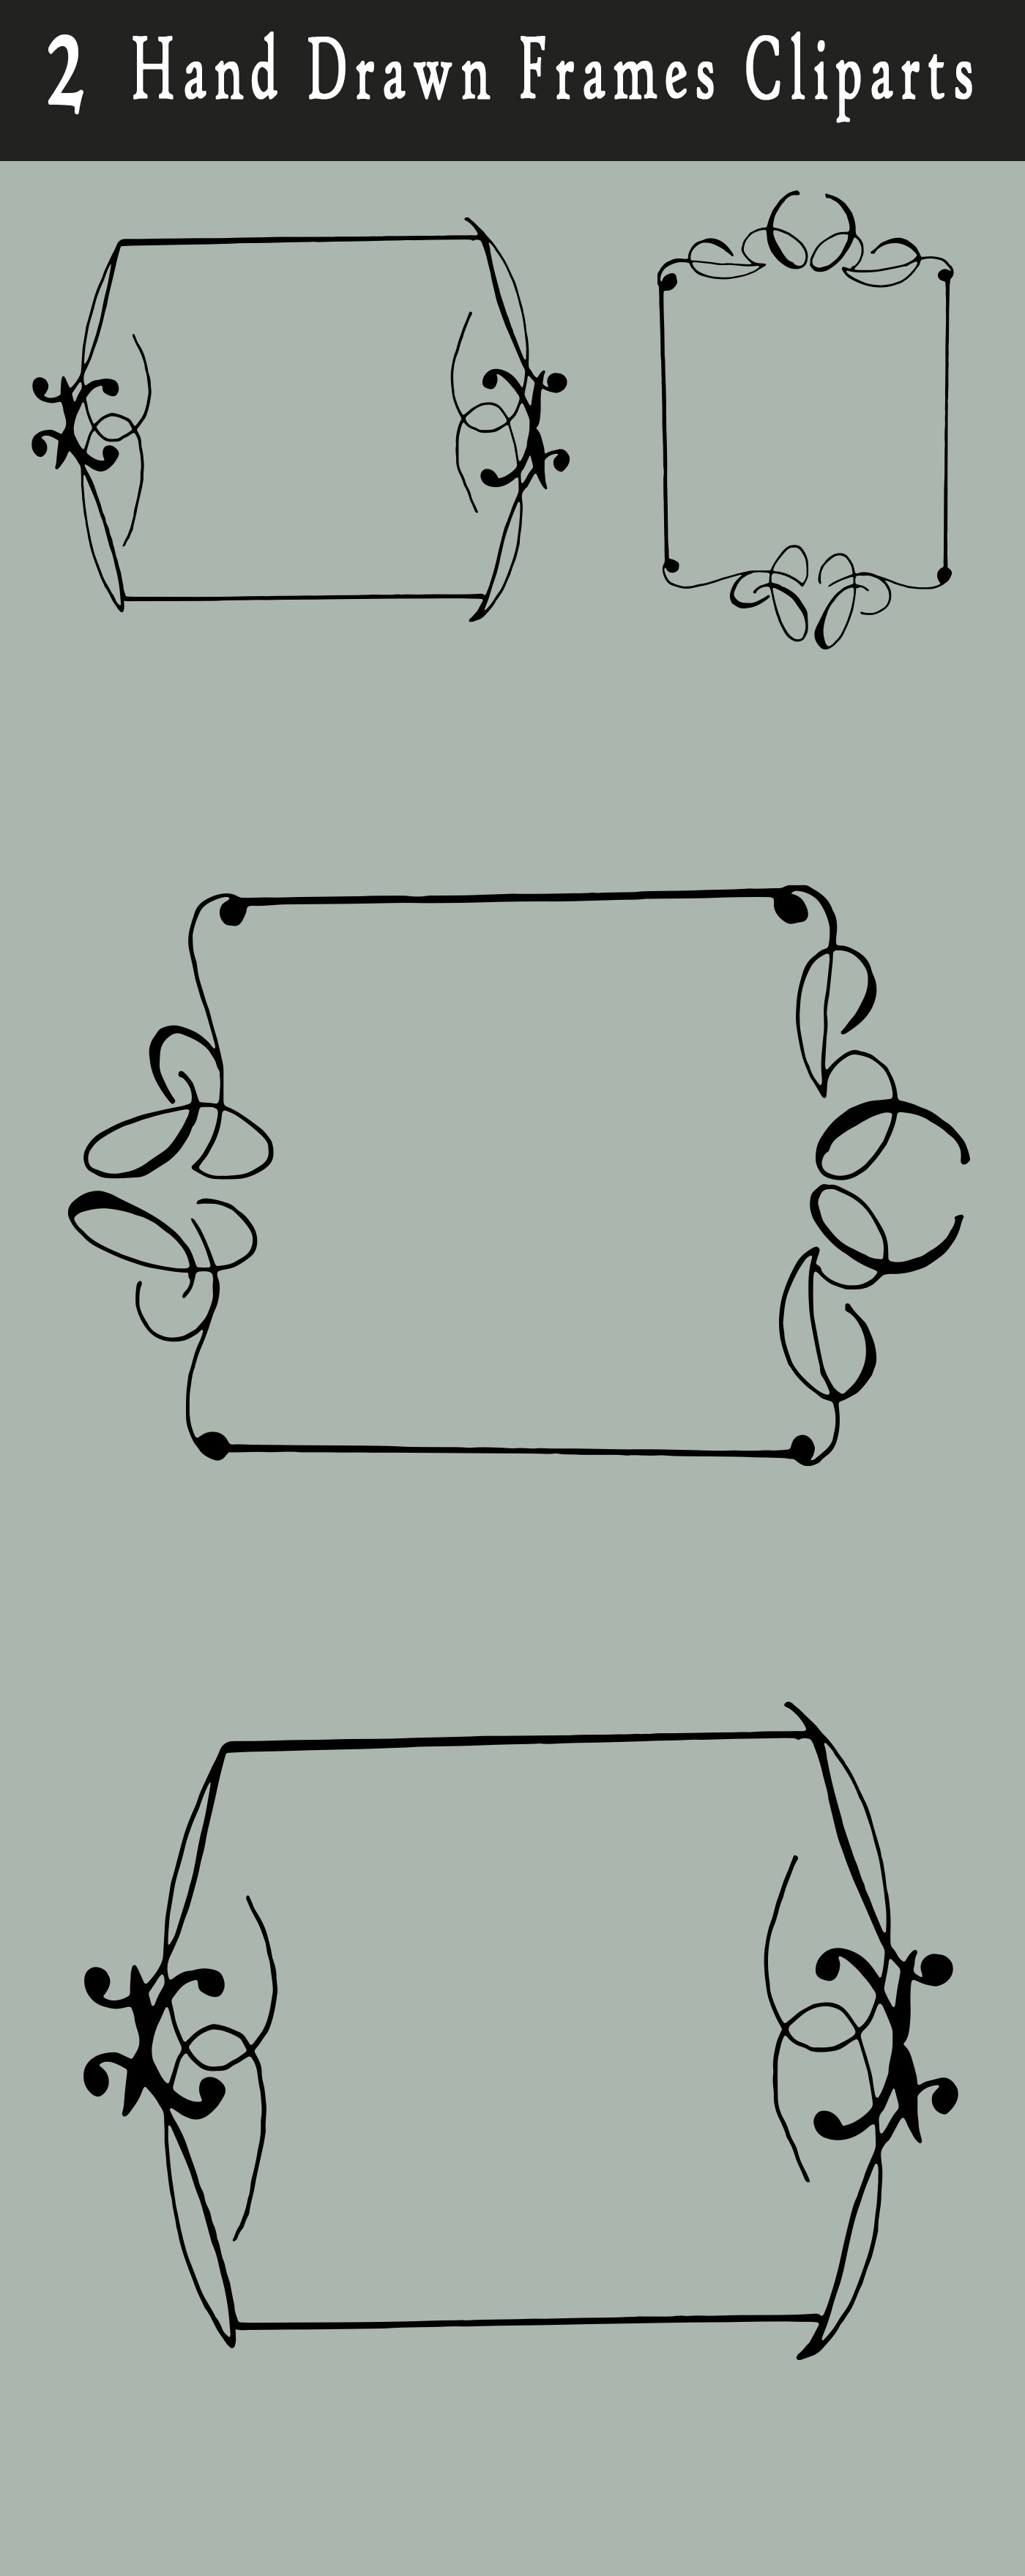 Free Handmade Frames Cliparts is a unique pack of hand drawn digital elements for your projects.